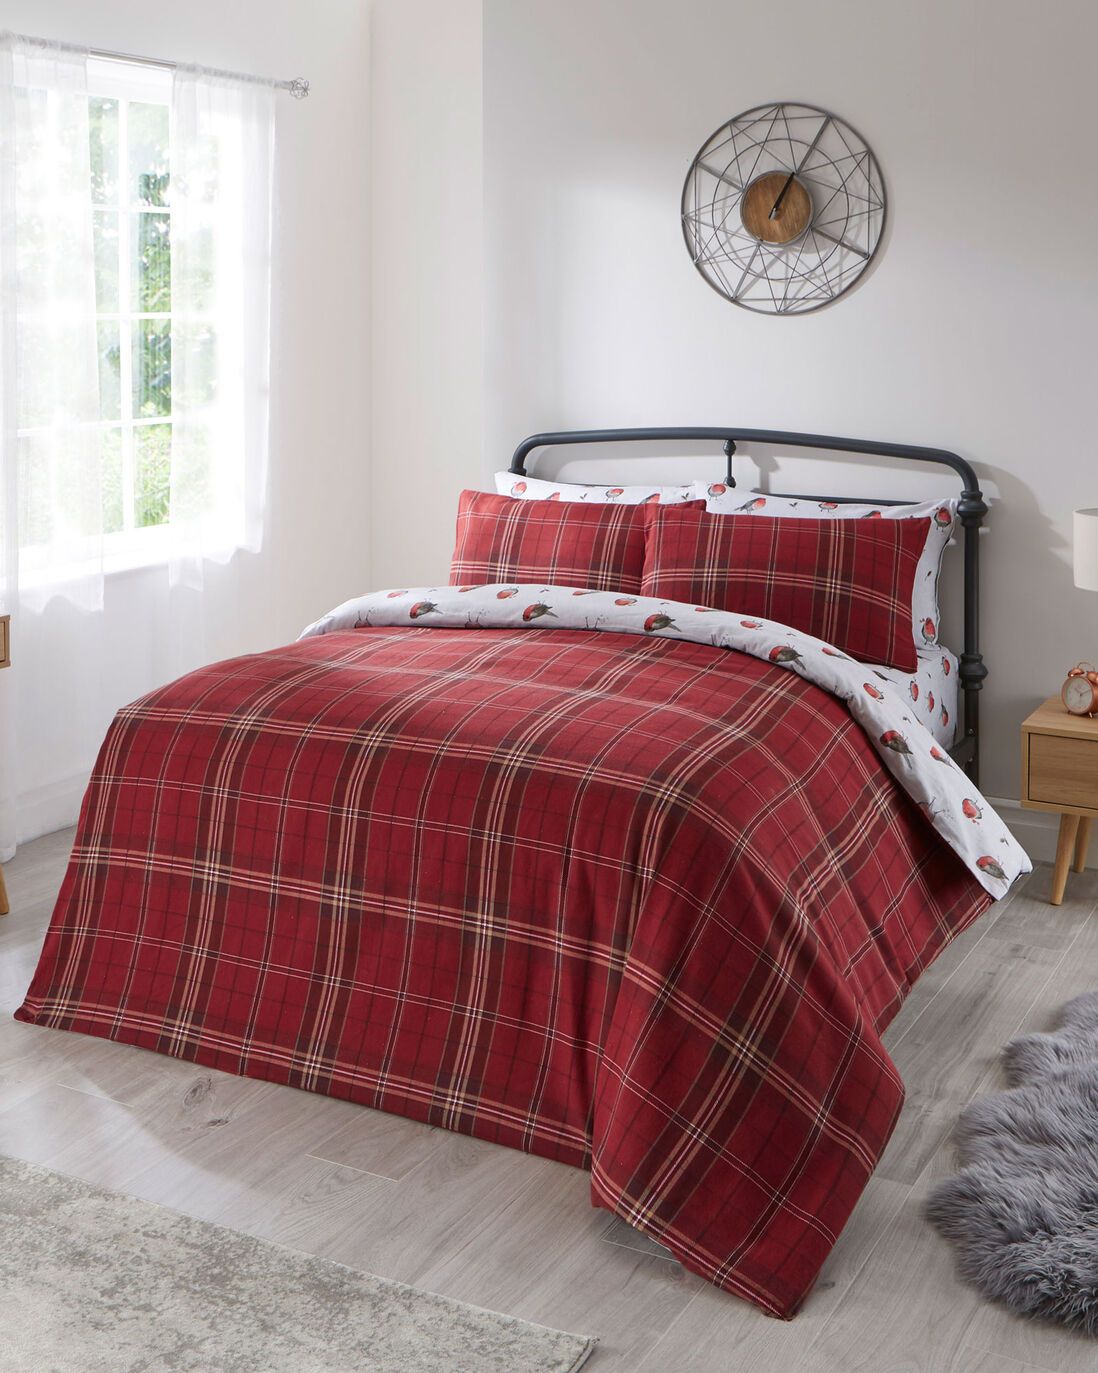 Stag XMAS Tartan Thermal Flannel Duvet Cover Set Brushed Cotton All British Size 